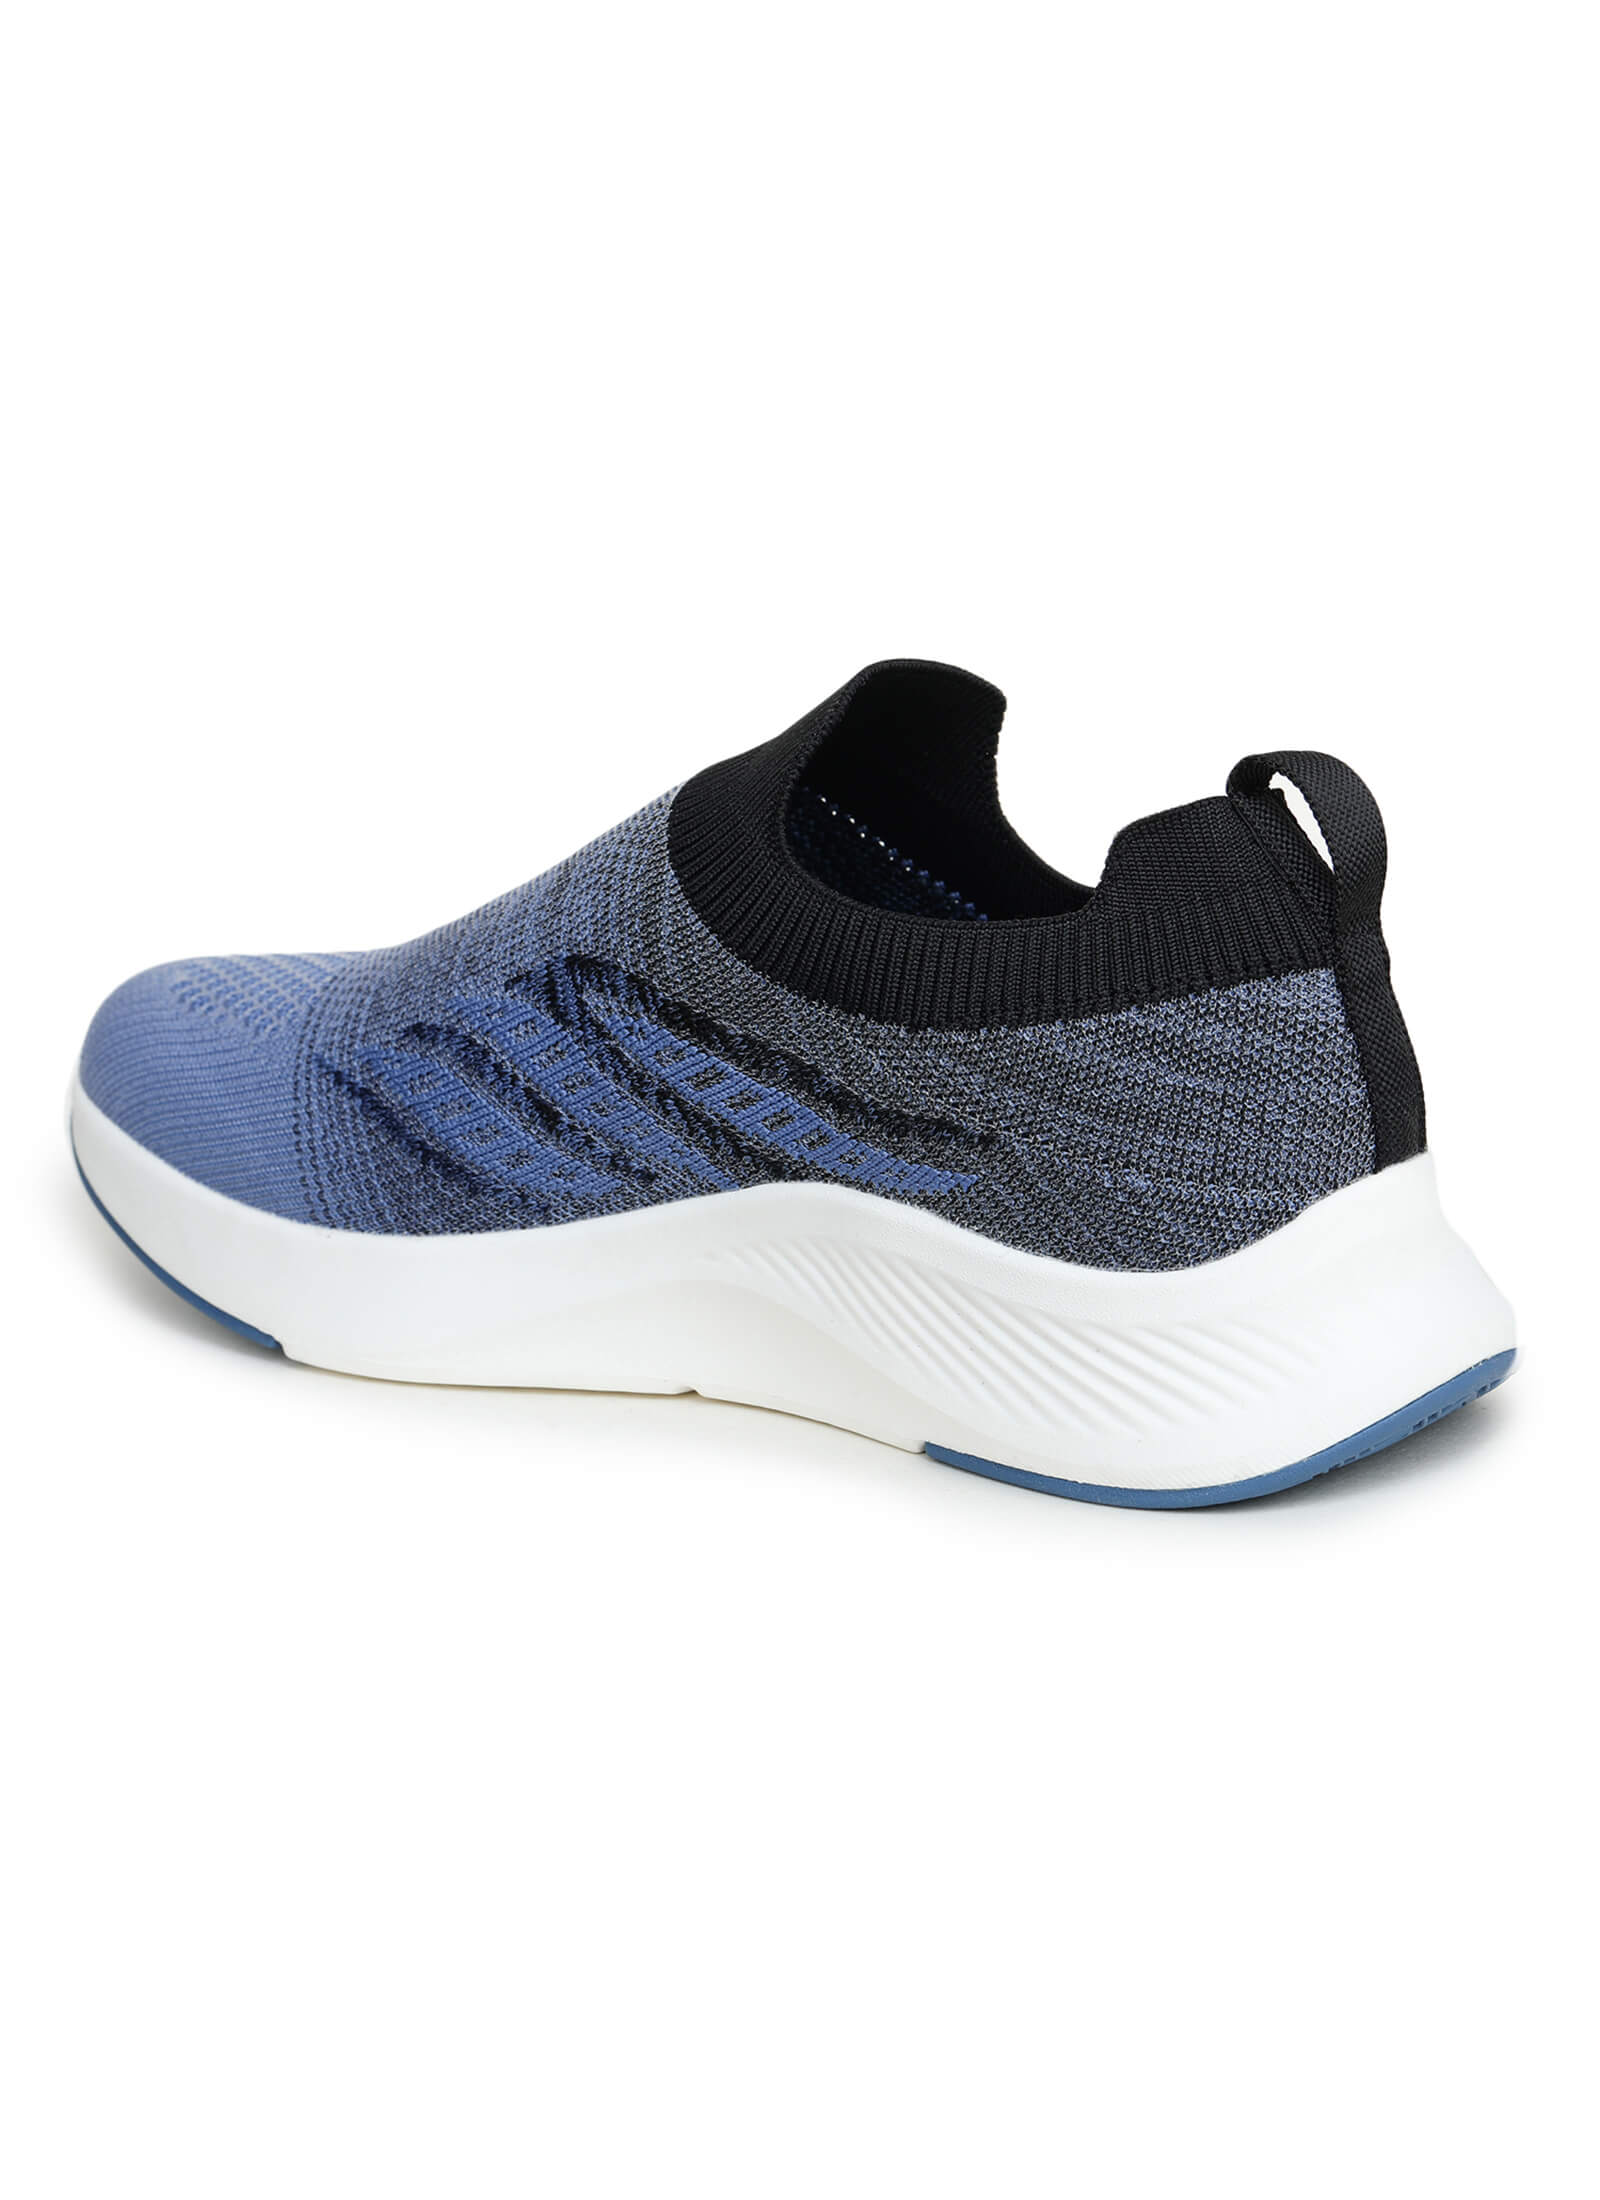 Honor Sports Shoes For Men